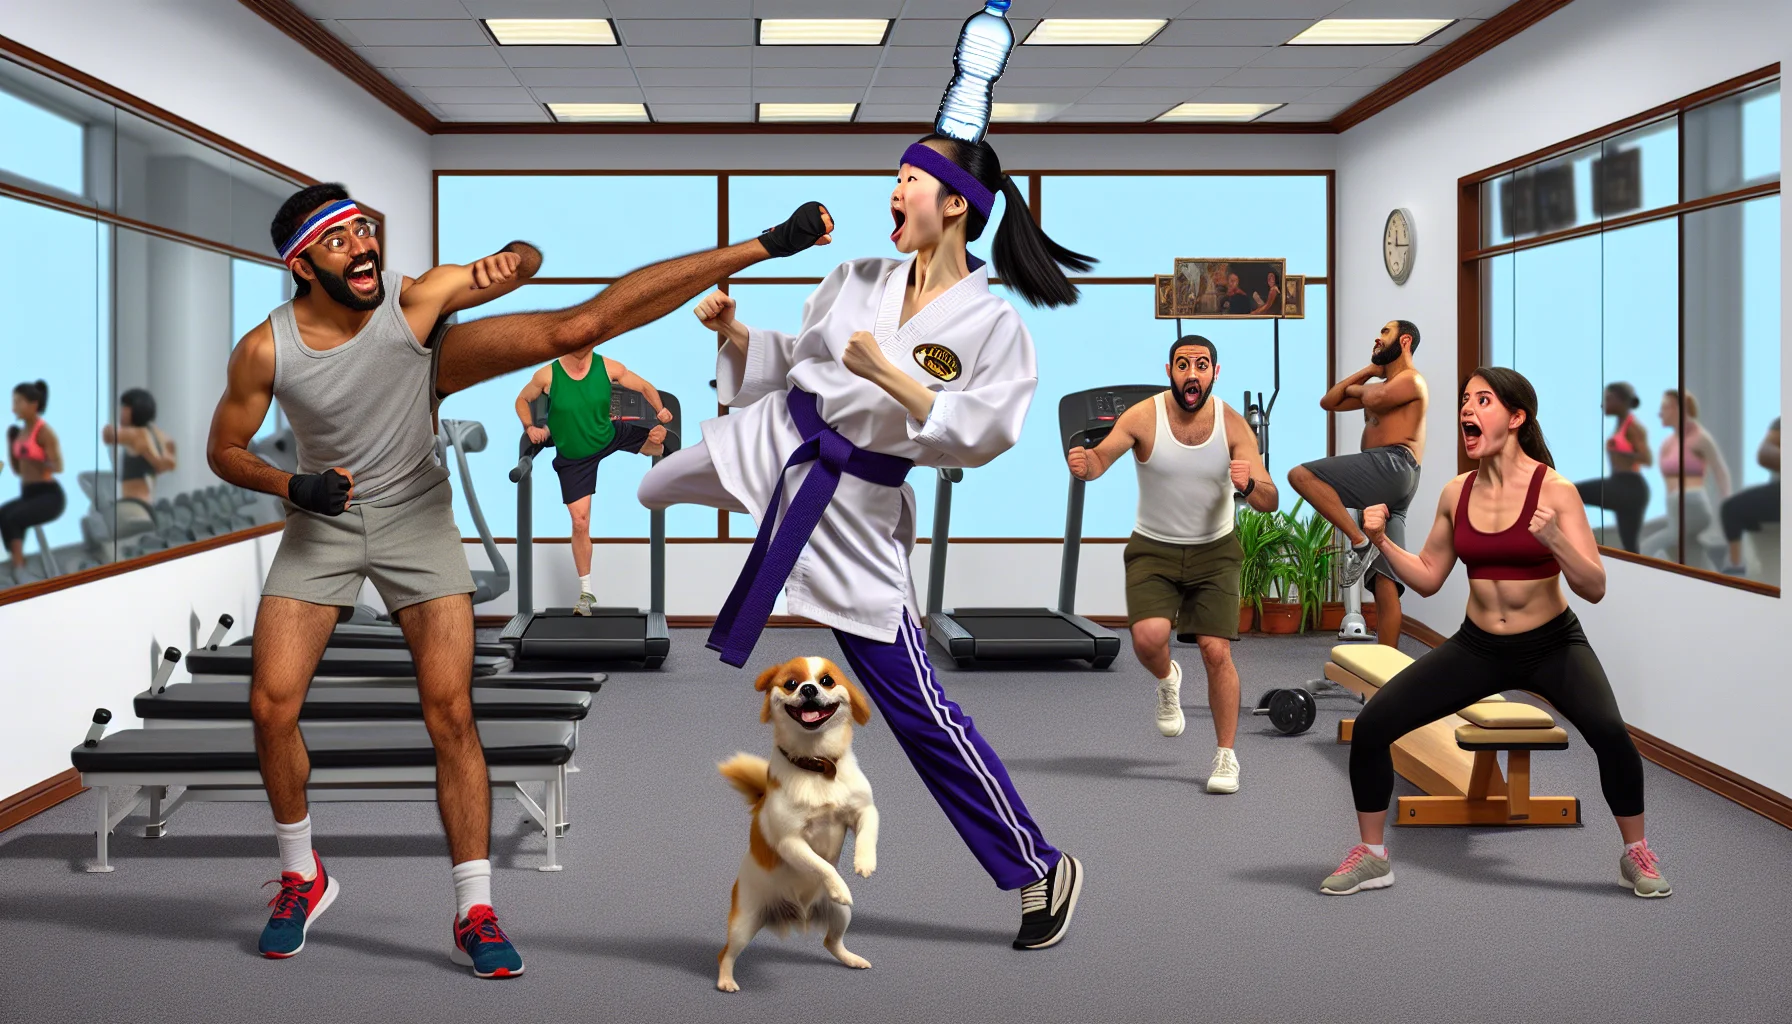 Draft a humorous, realistic scenario where an Asian female taejo kickboxing instructor and a Middle-Eastern male trainee are in a gym. The trainer is demonstrating a high kick, frozen mid-air just as her cap falls off her head. The trainee, caught by surprise, balances a water bottle on his head, attempting to mimic her. Nonchalant gym-goers of various descents and genders are in the background, using treadmills and lifting weights, providing a contrasting serious tone. An excited dog, wearing a mini sweatband, enthusiastically cheers them on, adding to the comedic scenario. The text 'Exercise can be fun!' is seen in bold, inspiring letters at the top.